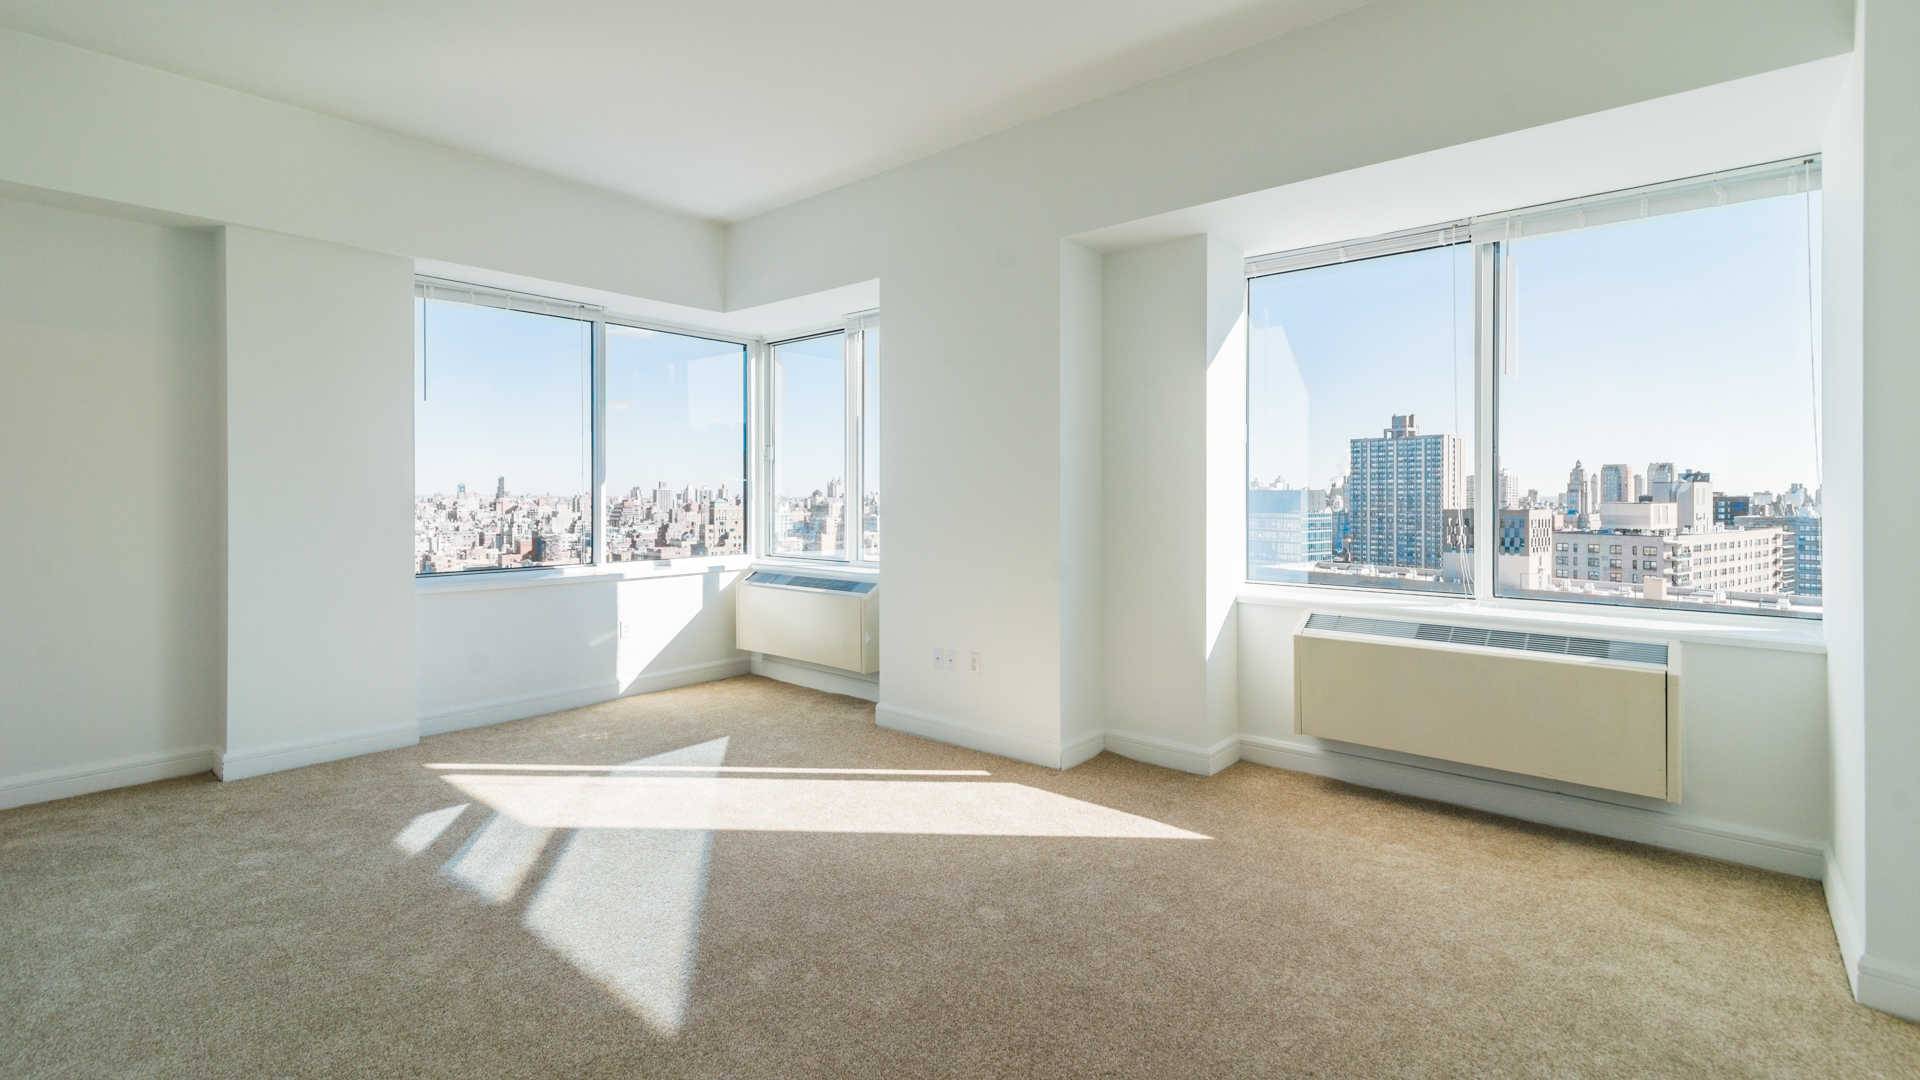 Fabulous 1 bedroom 1 bathroom  on the high-rise floor with fantastic view.